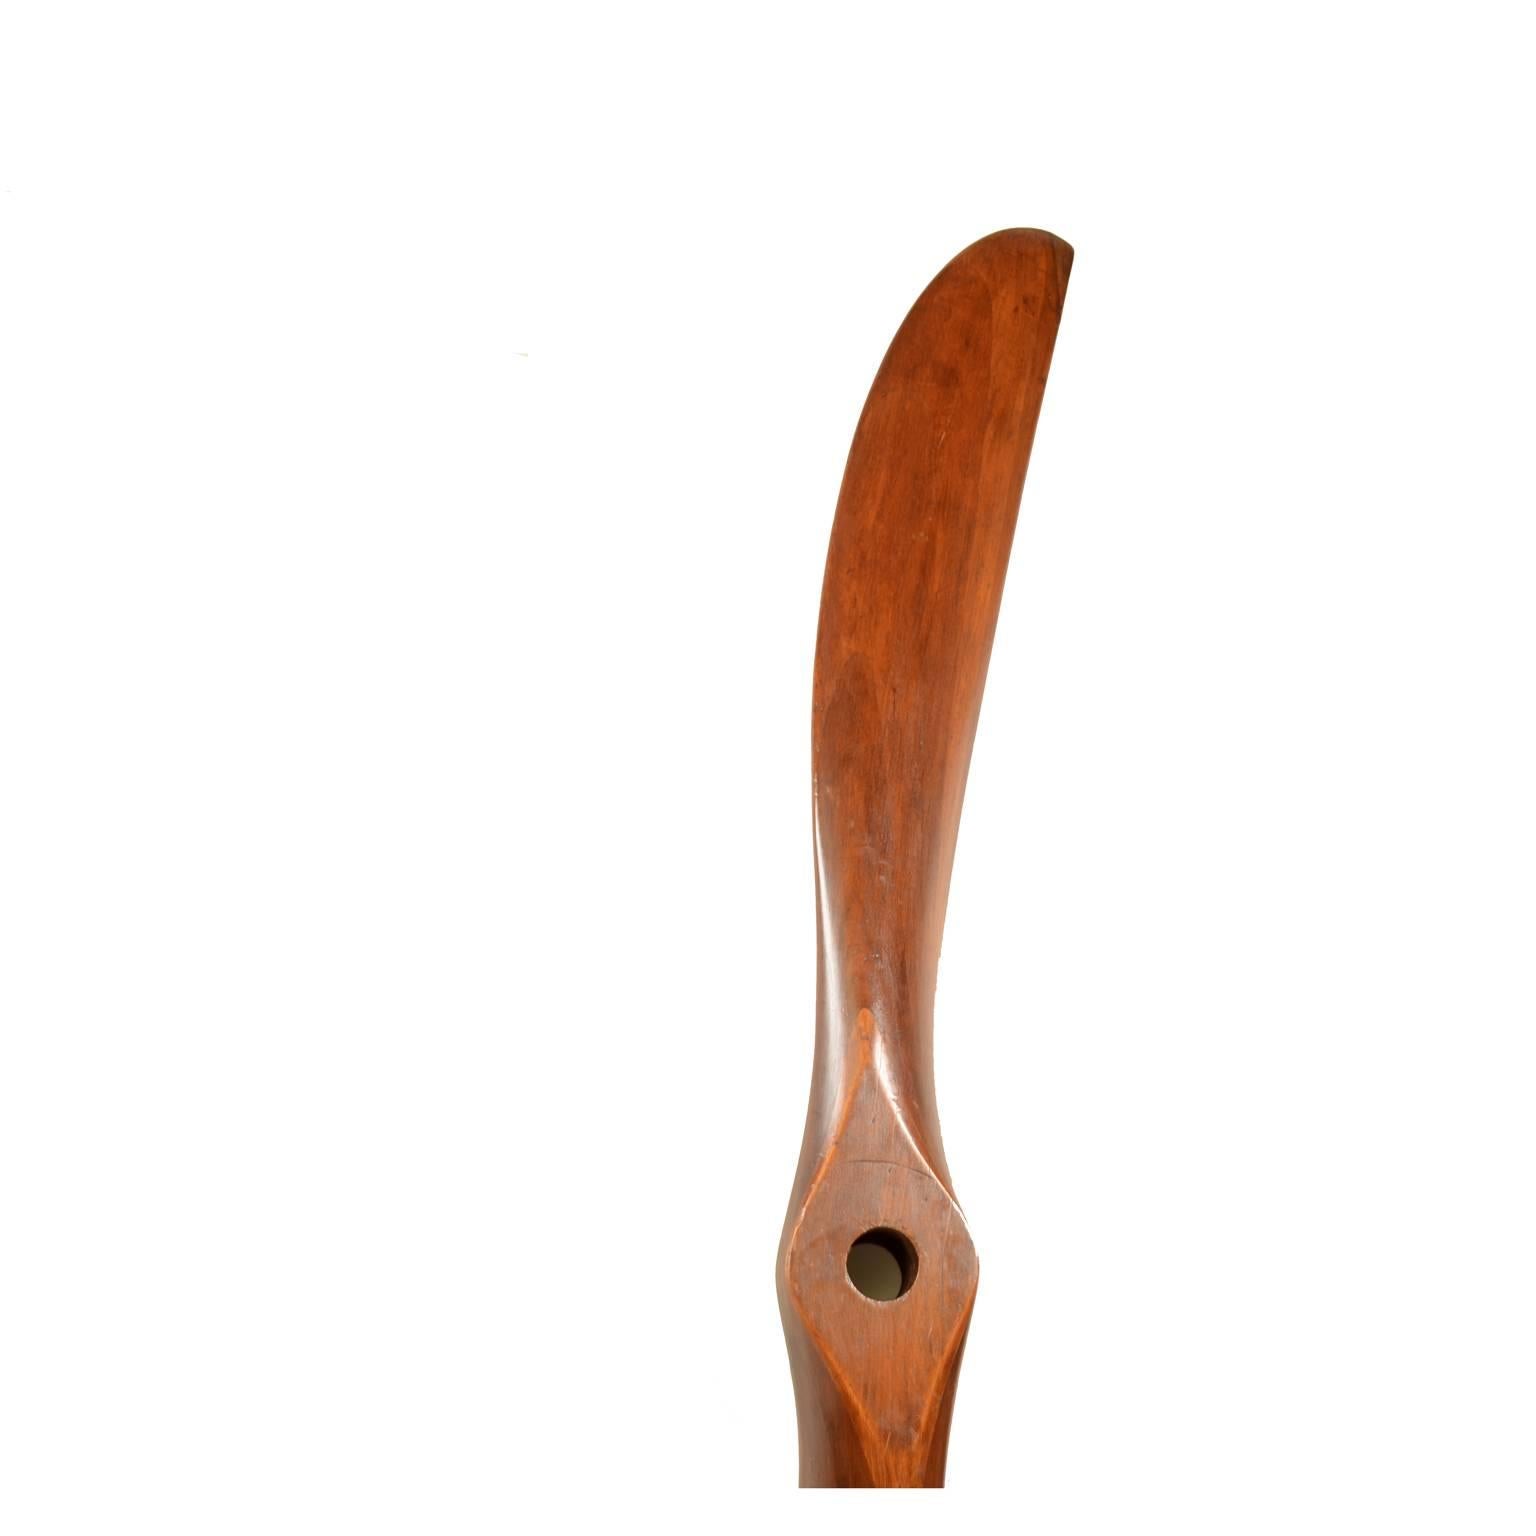 Early 20th Century Propeller Made of Laminated Mahogany Wood, American Manufacture, 1915 circa